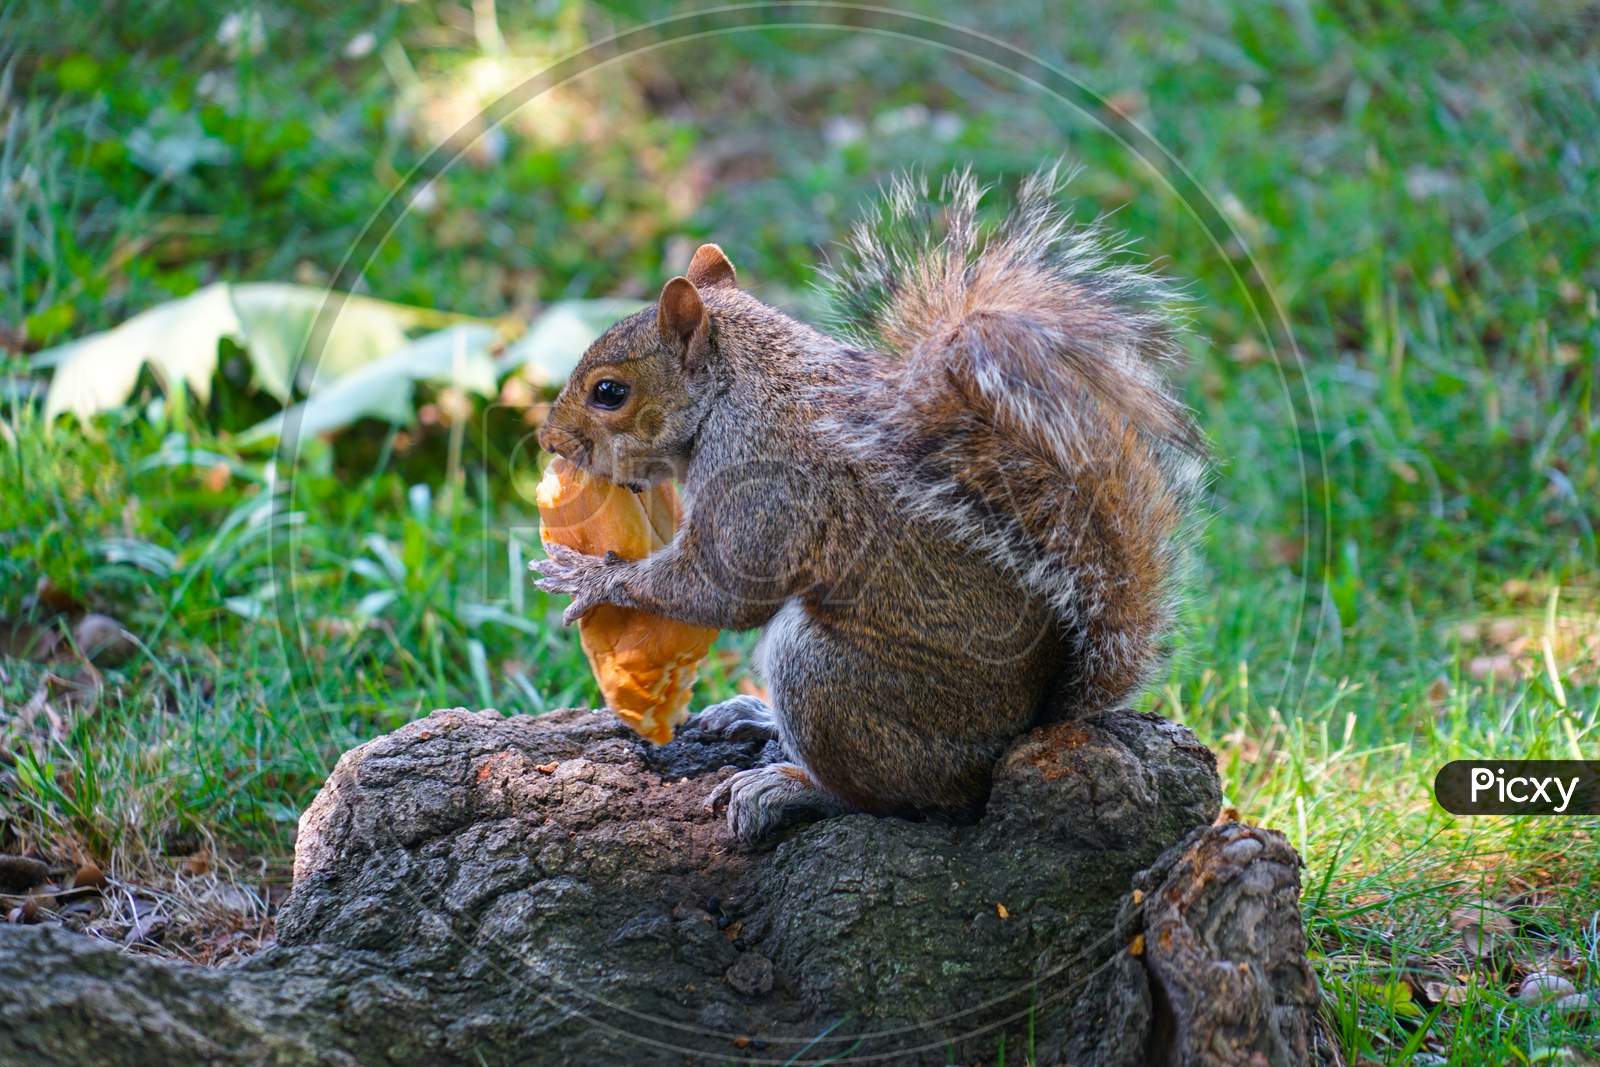 Of Squirrel Eating Bread Image